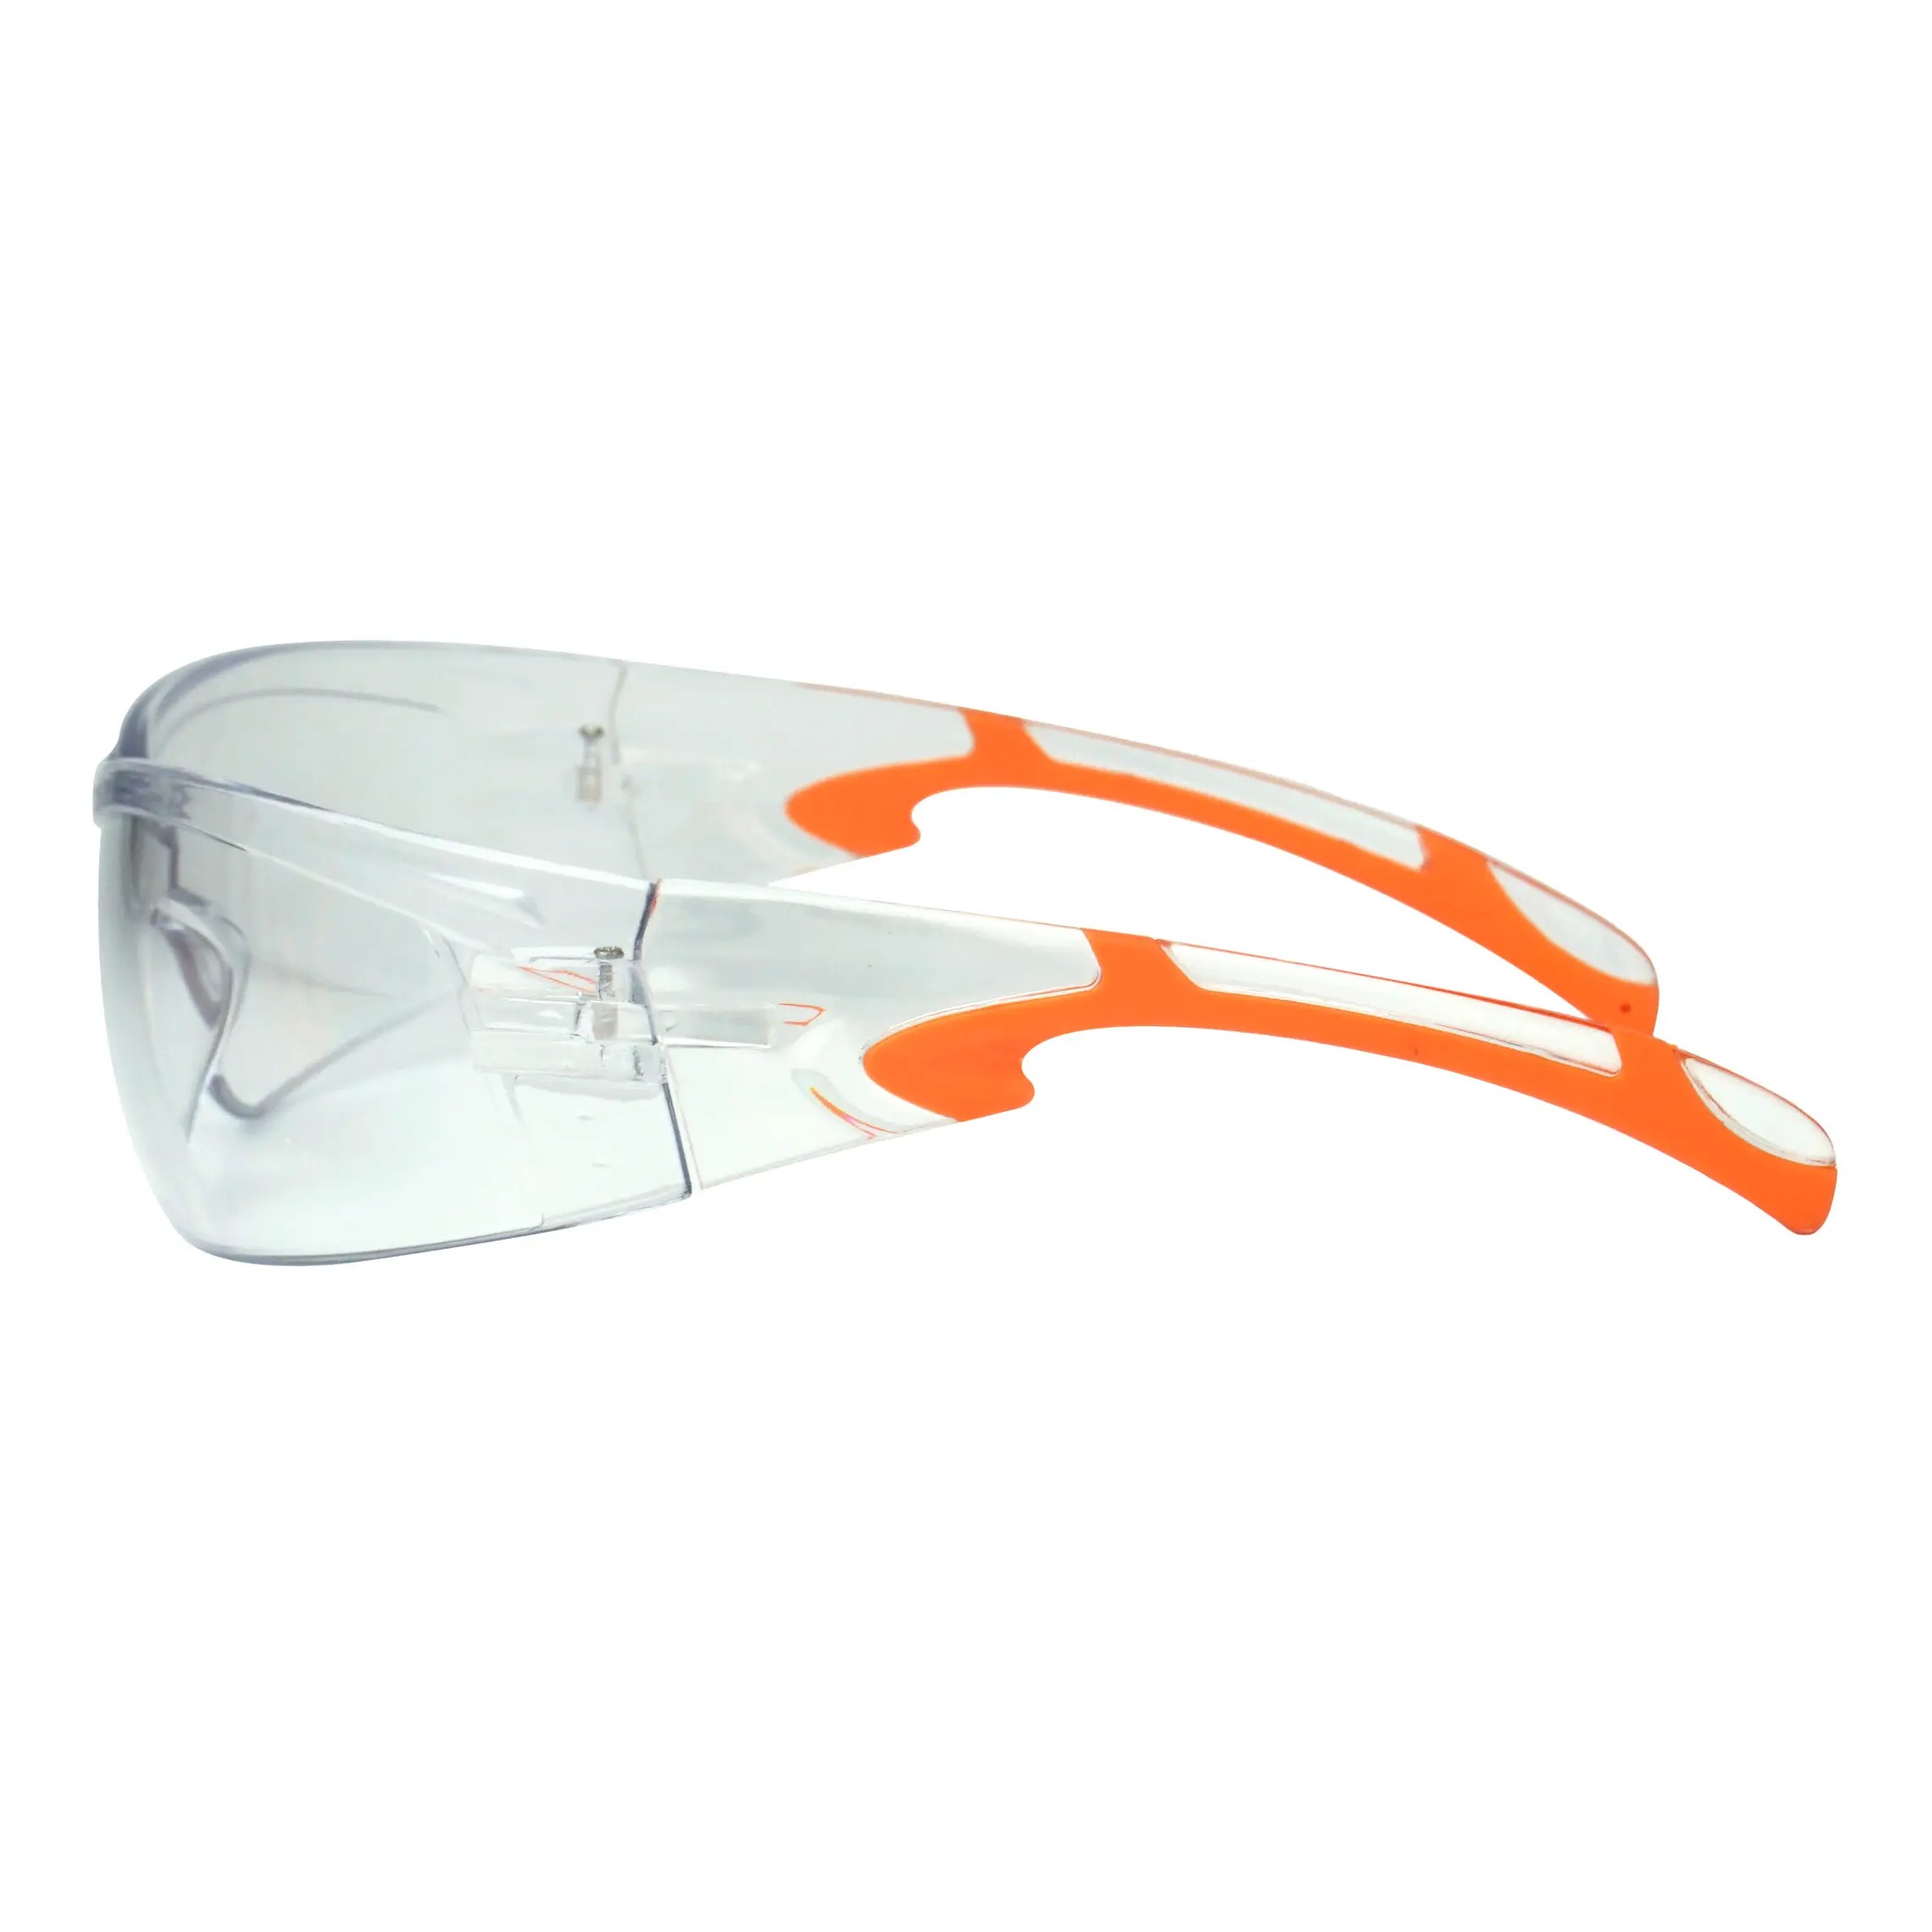 face shield ce sport sun glasses recycled safety glasses eye protection sunglasses manufacturer protective glasses